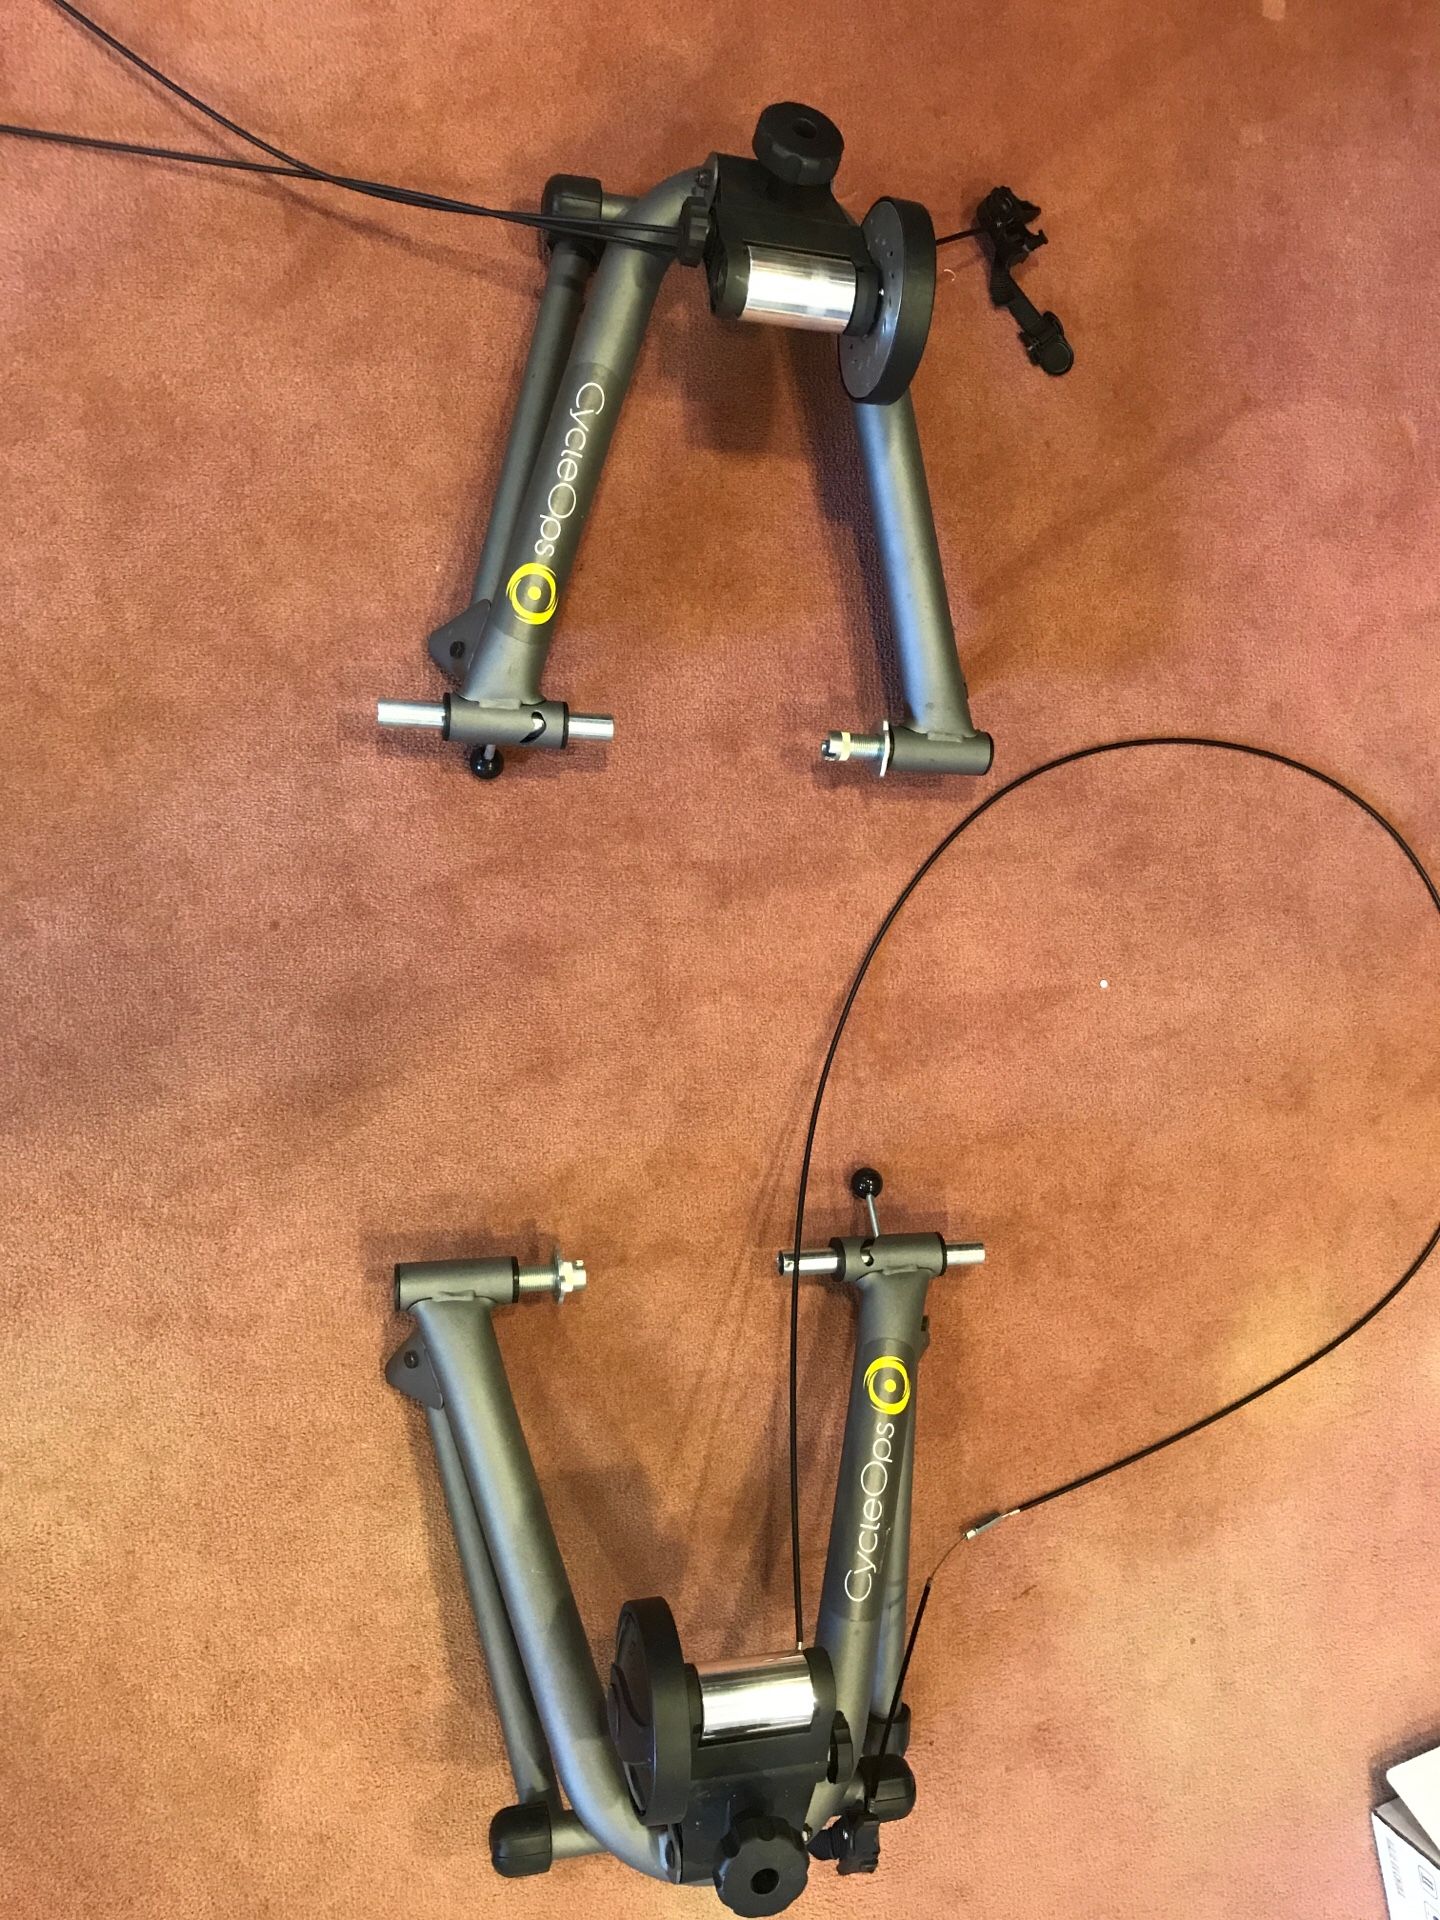 Stationary bicycle mount